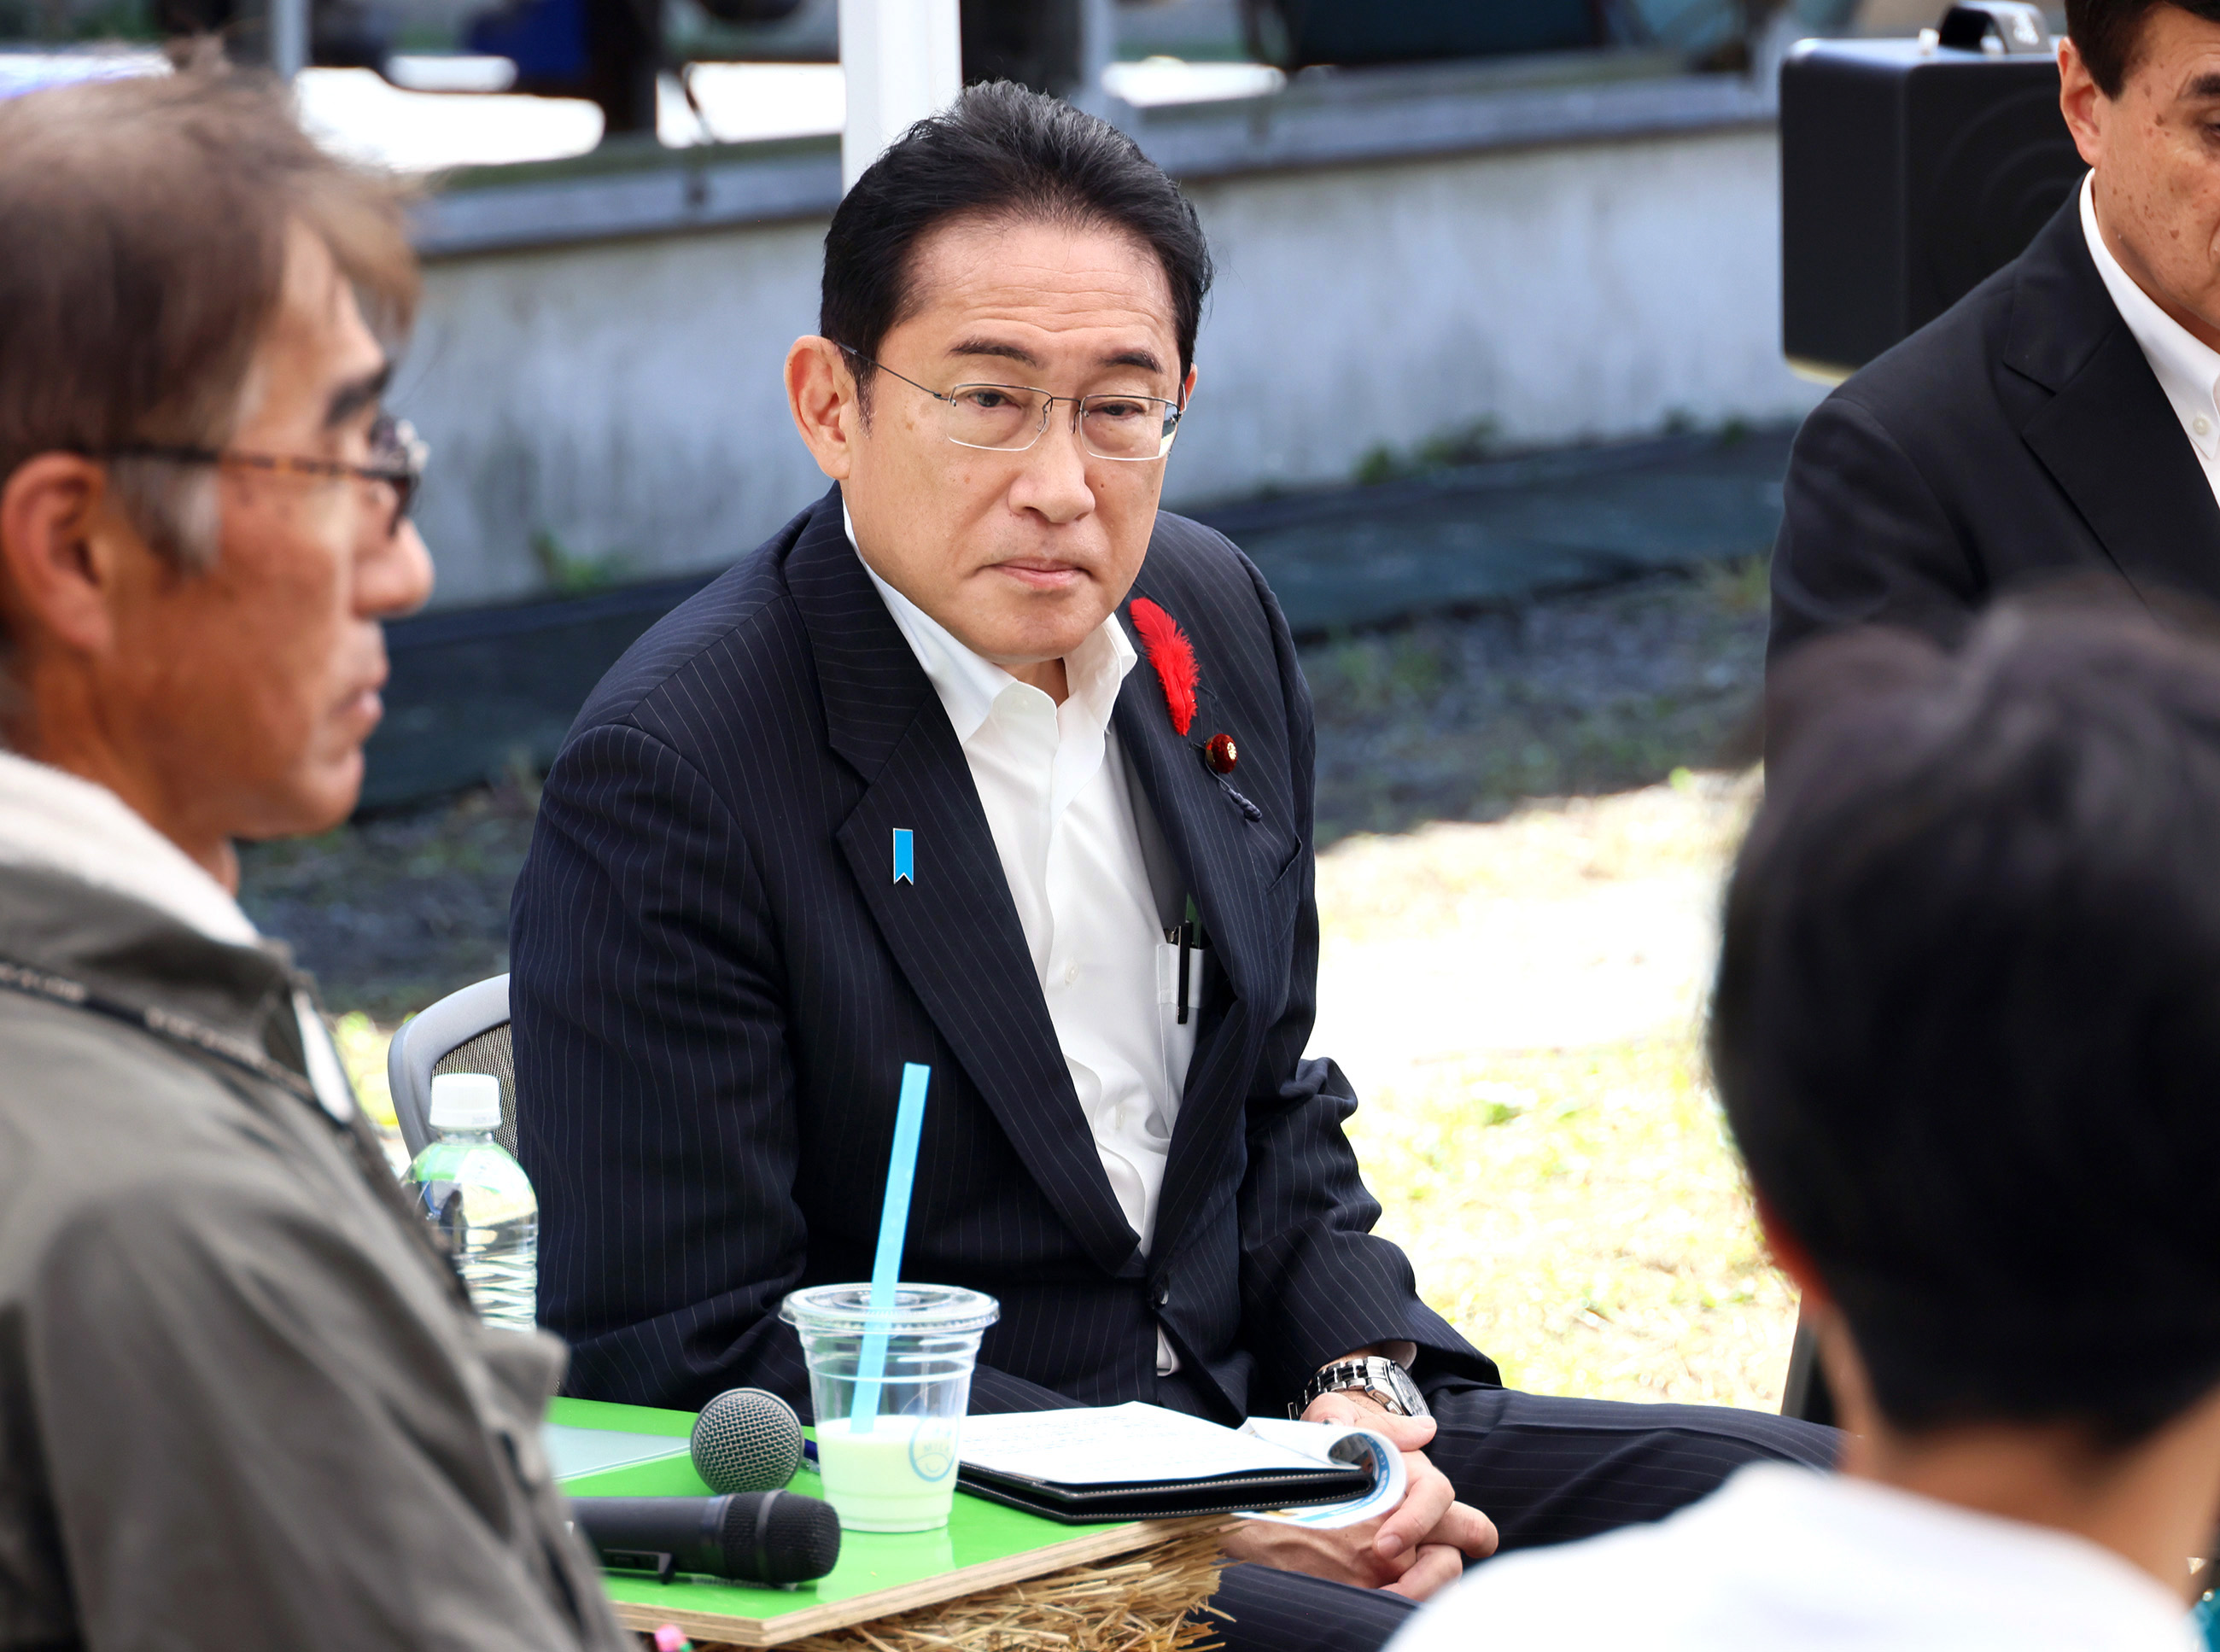 Prime Minister Kishida listening to participants at the small group talk (1)